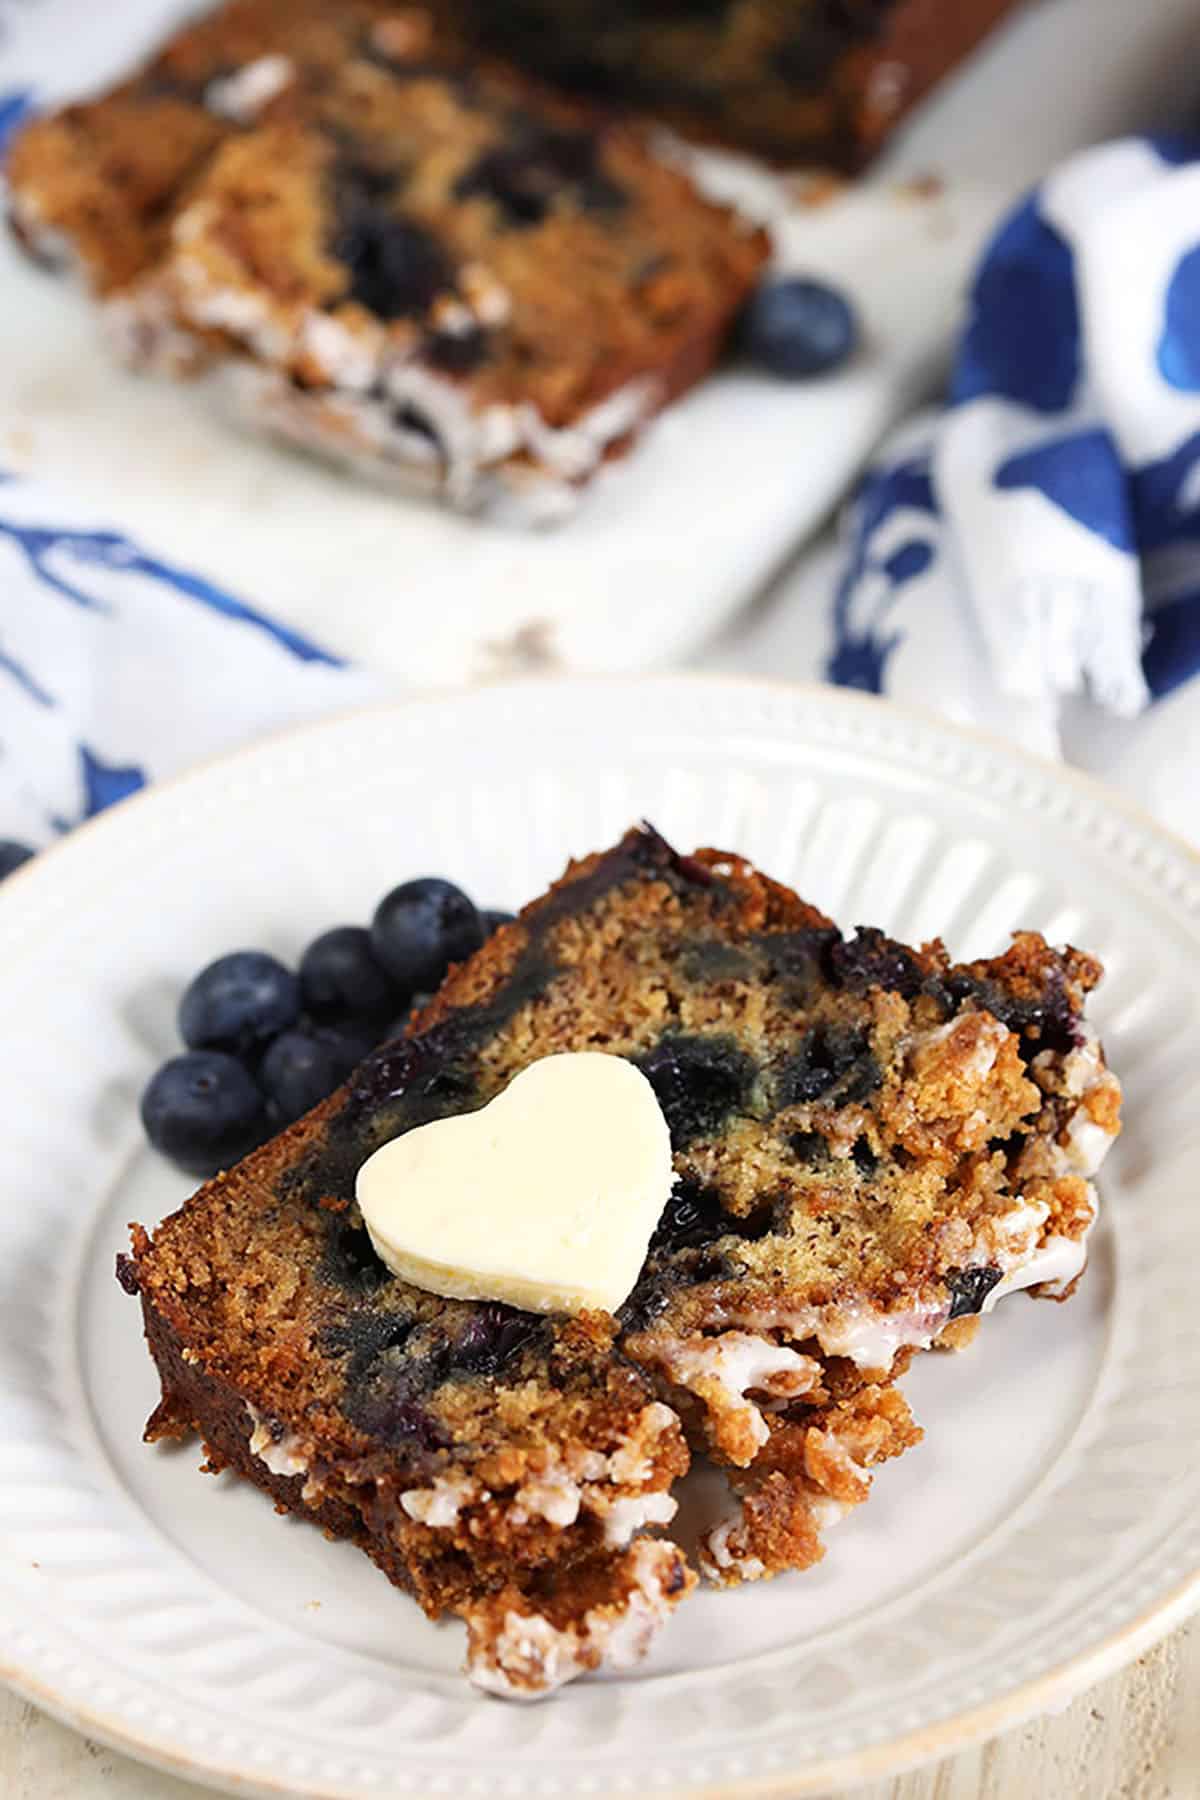 A slice of Blueberry Banana Bread with a heart shaped butter pat on a white plate